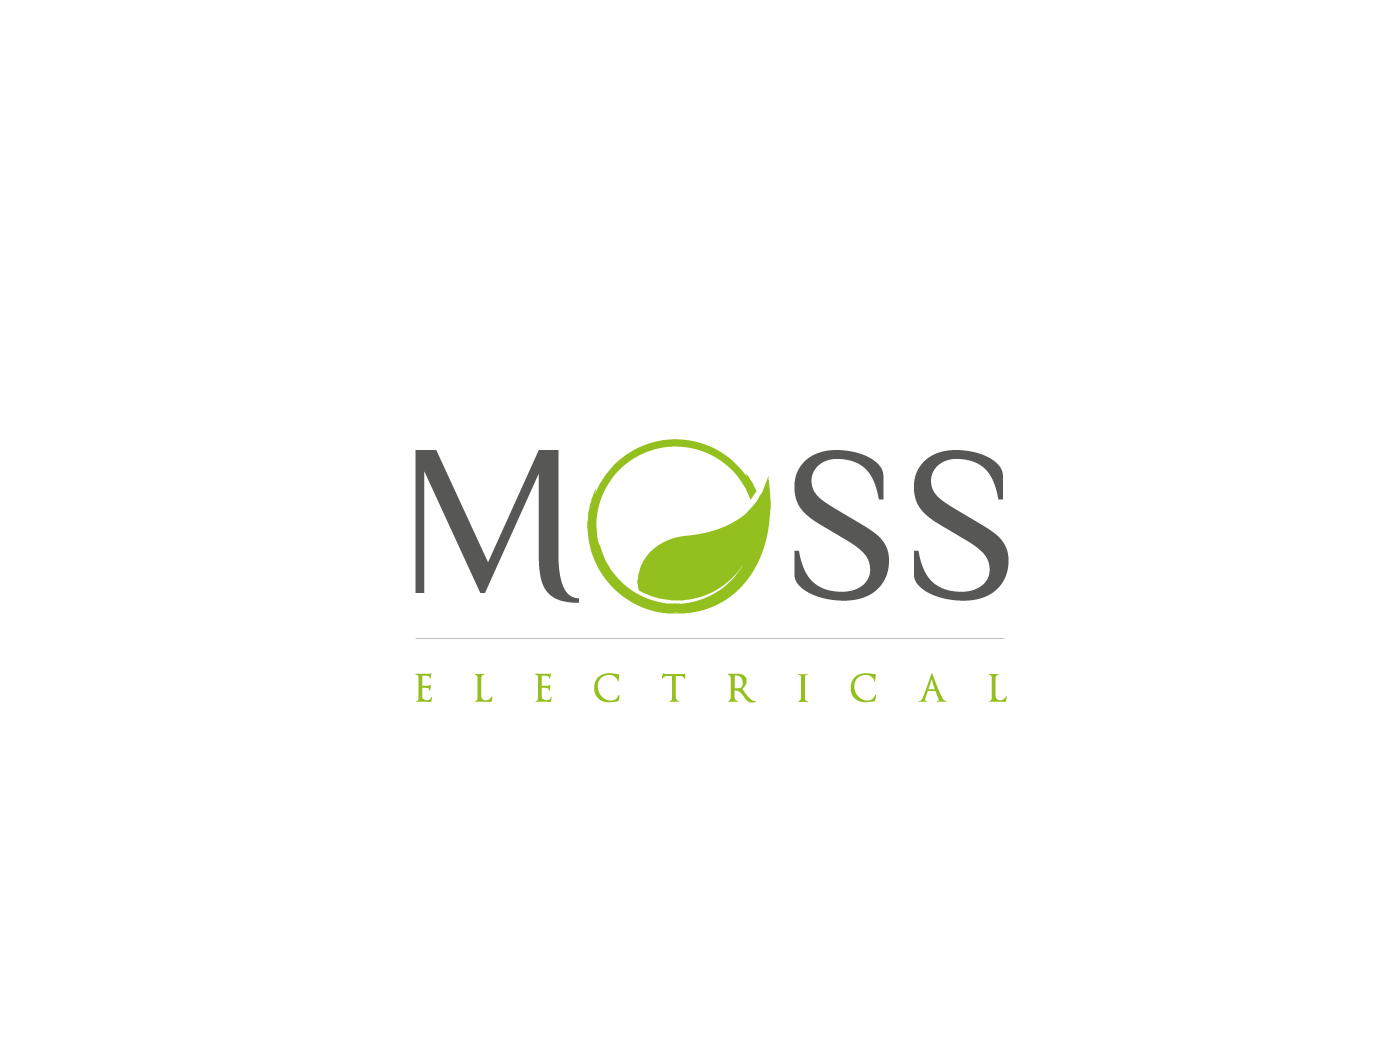 Moss Logo - Modern, Professional, Electrical Logo Design for Moss Electrical by ...